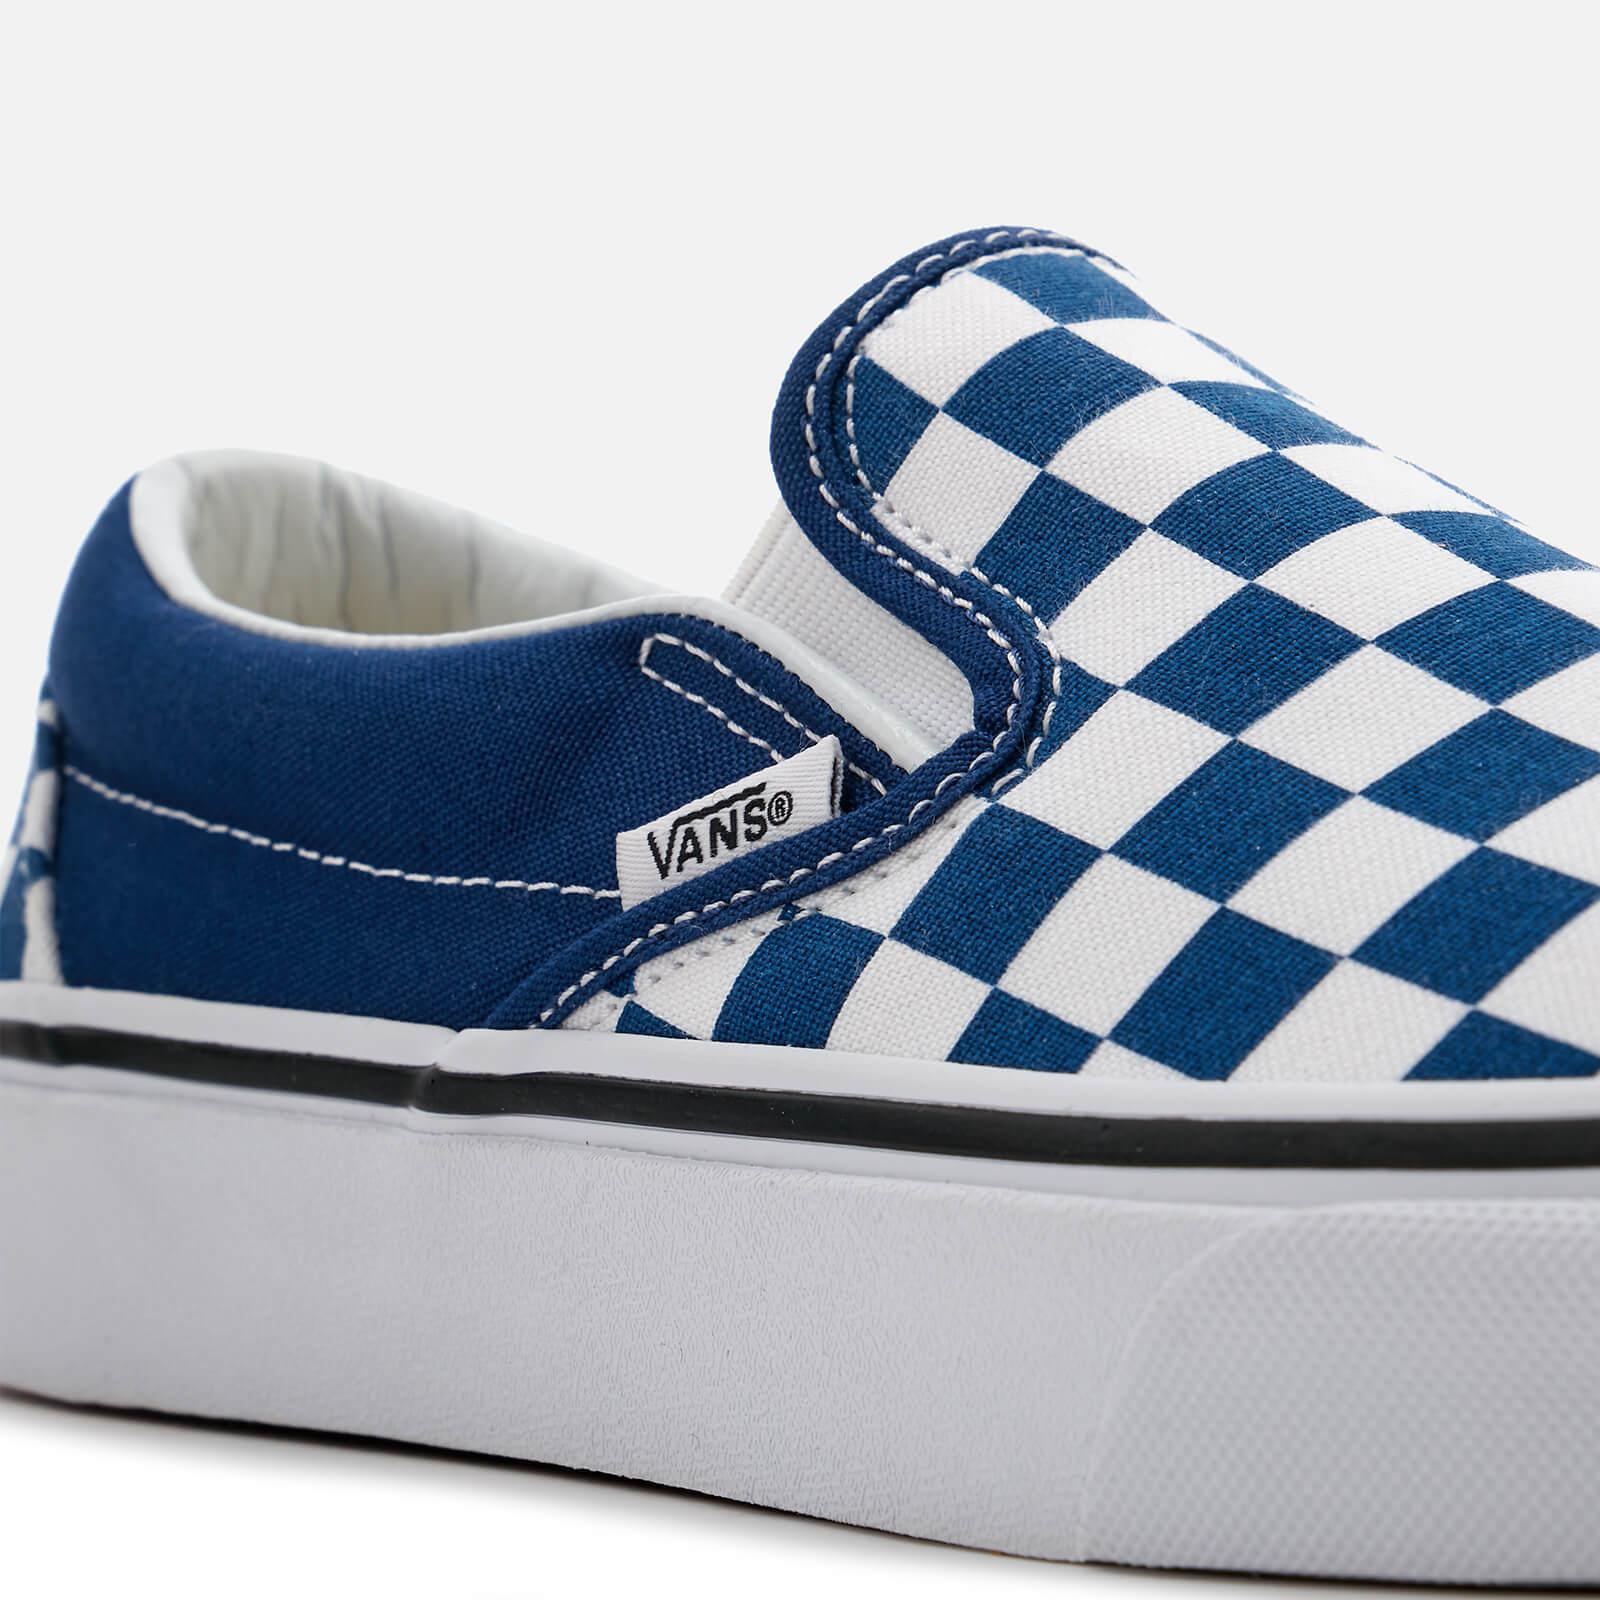 Vans Checkerboard Slip-on Trainers in Blue for Men - Lyst